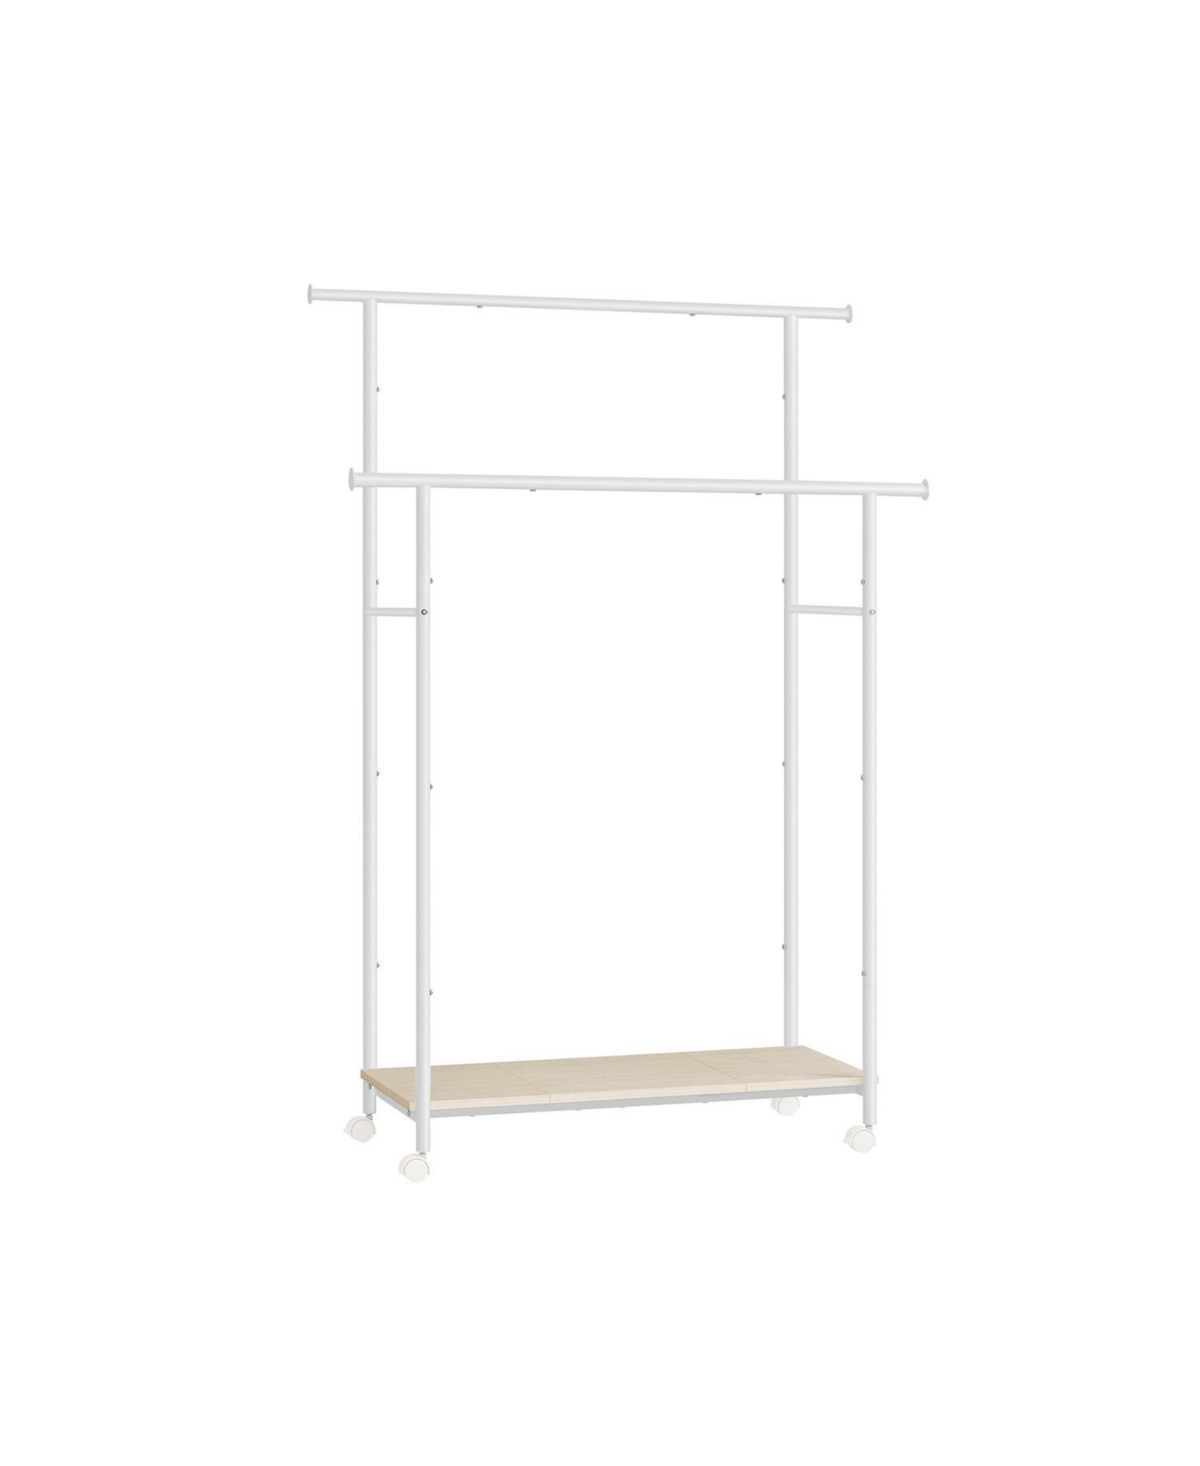 Clothes Rack with Wheels, Double-Rod Clothing Rack for Hanging Clothes with Shelf - White